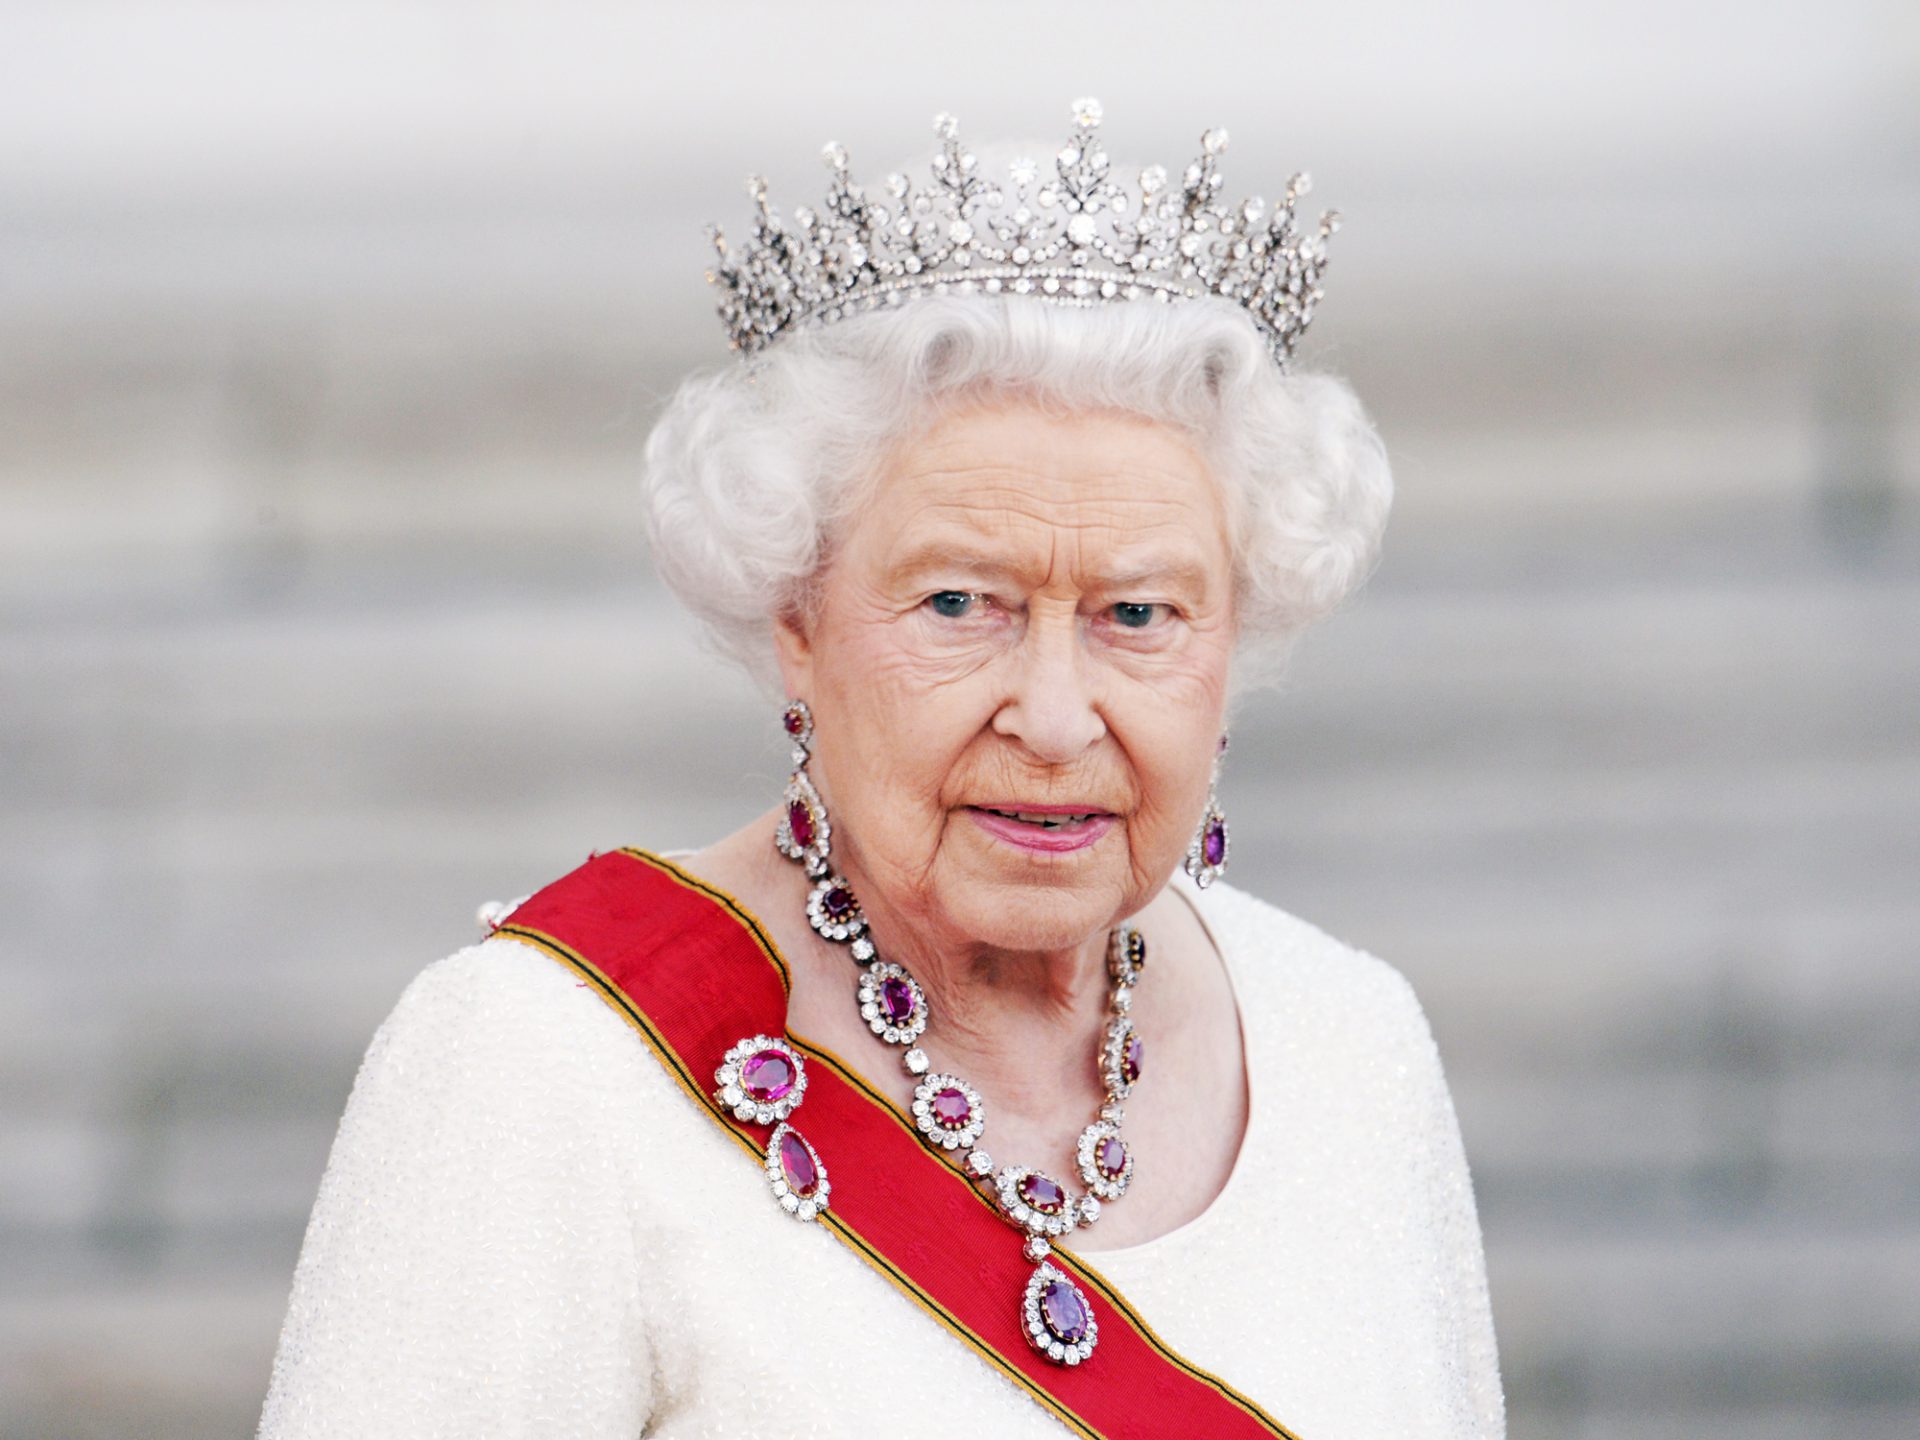 Succession speculation rampant as Queen Elizabeth turns 92 | Foreign Brief